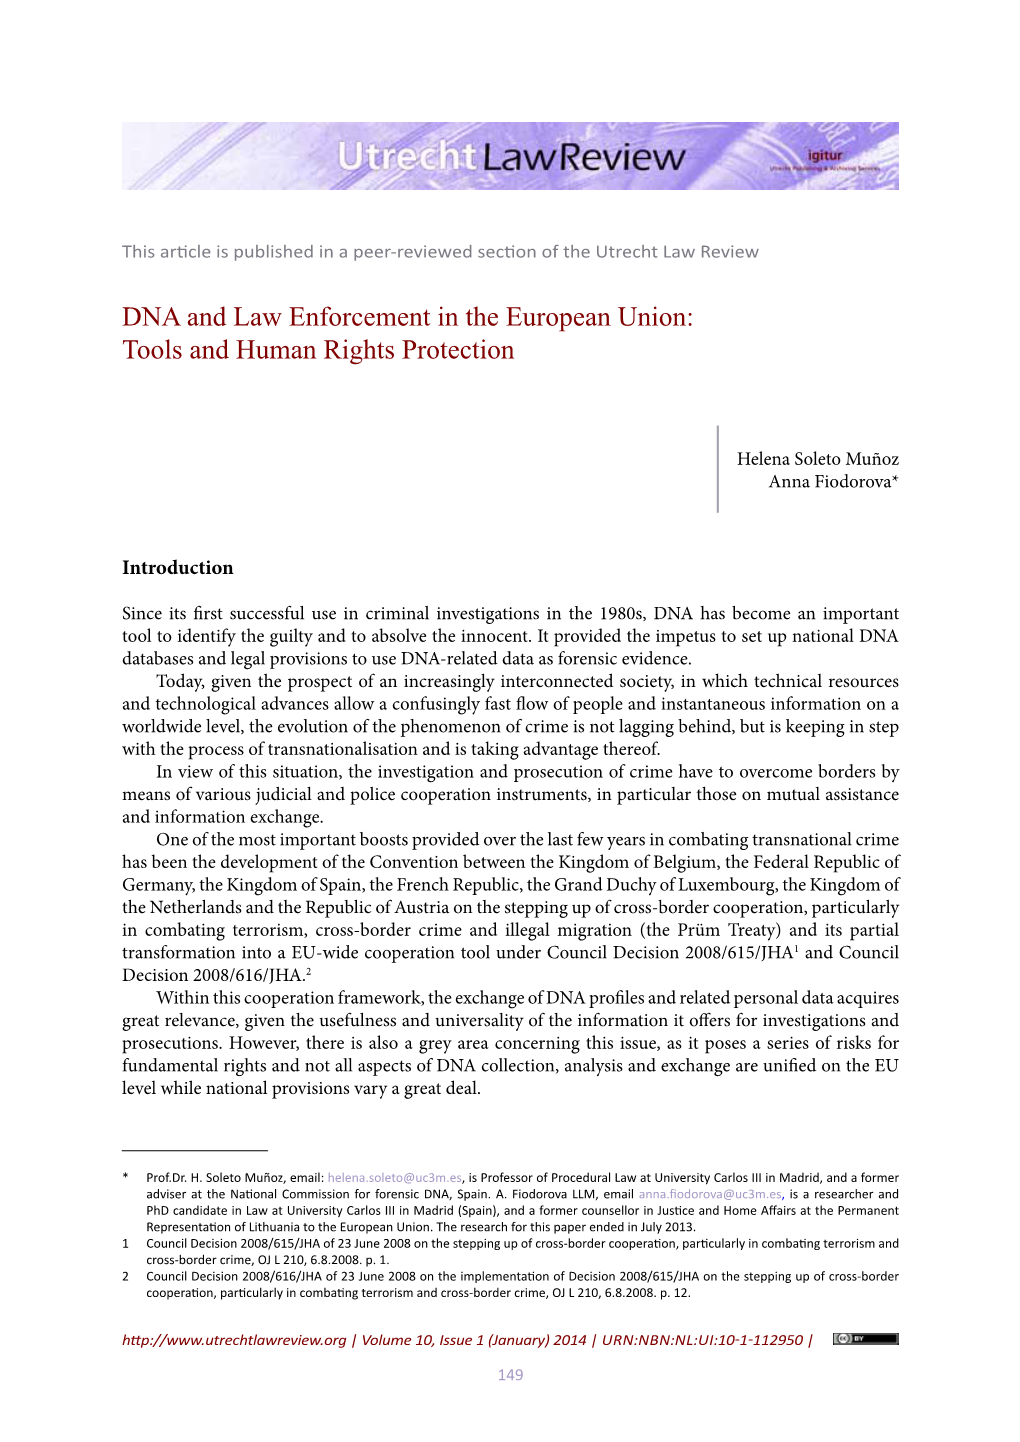 DNA and Law Enforcement in the European Union: Tools and Human Rights Protection